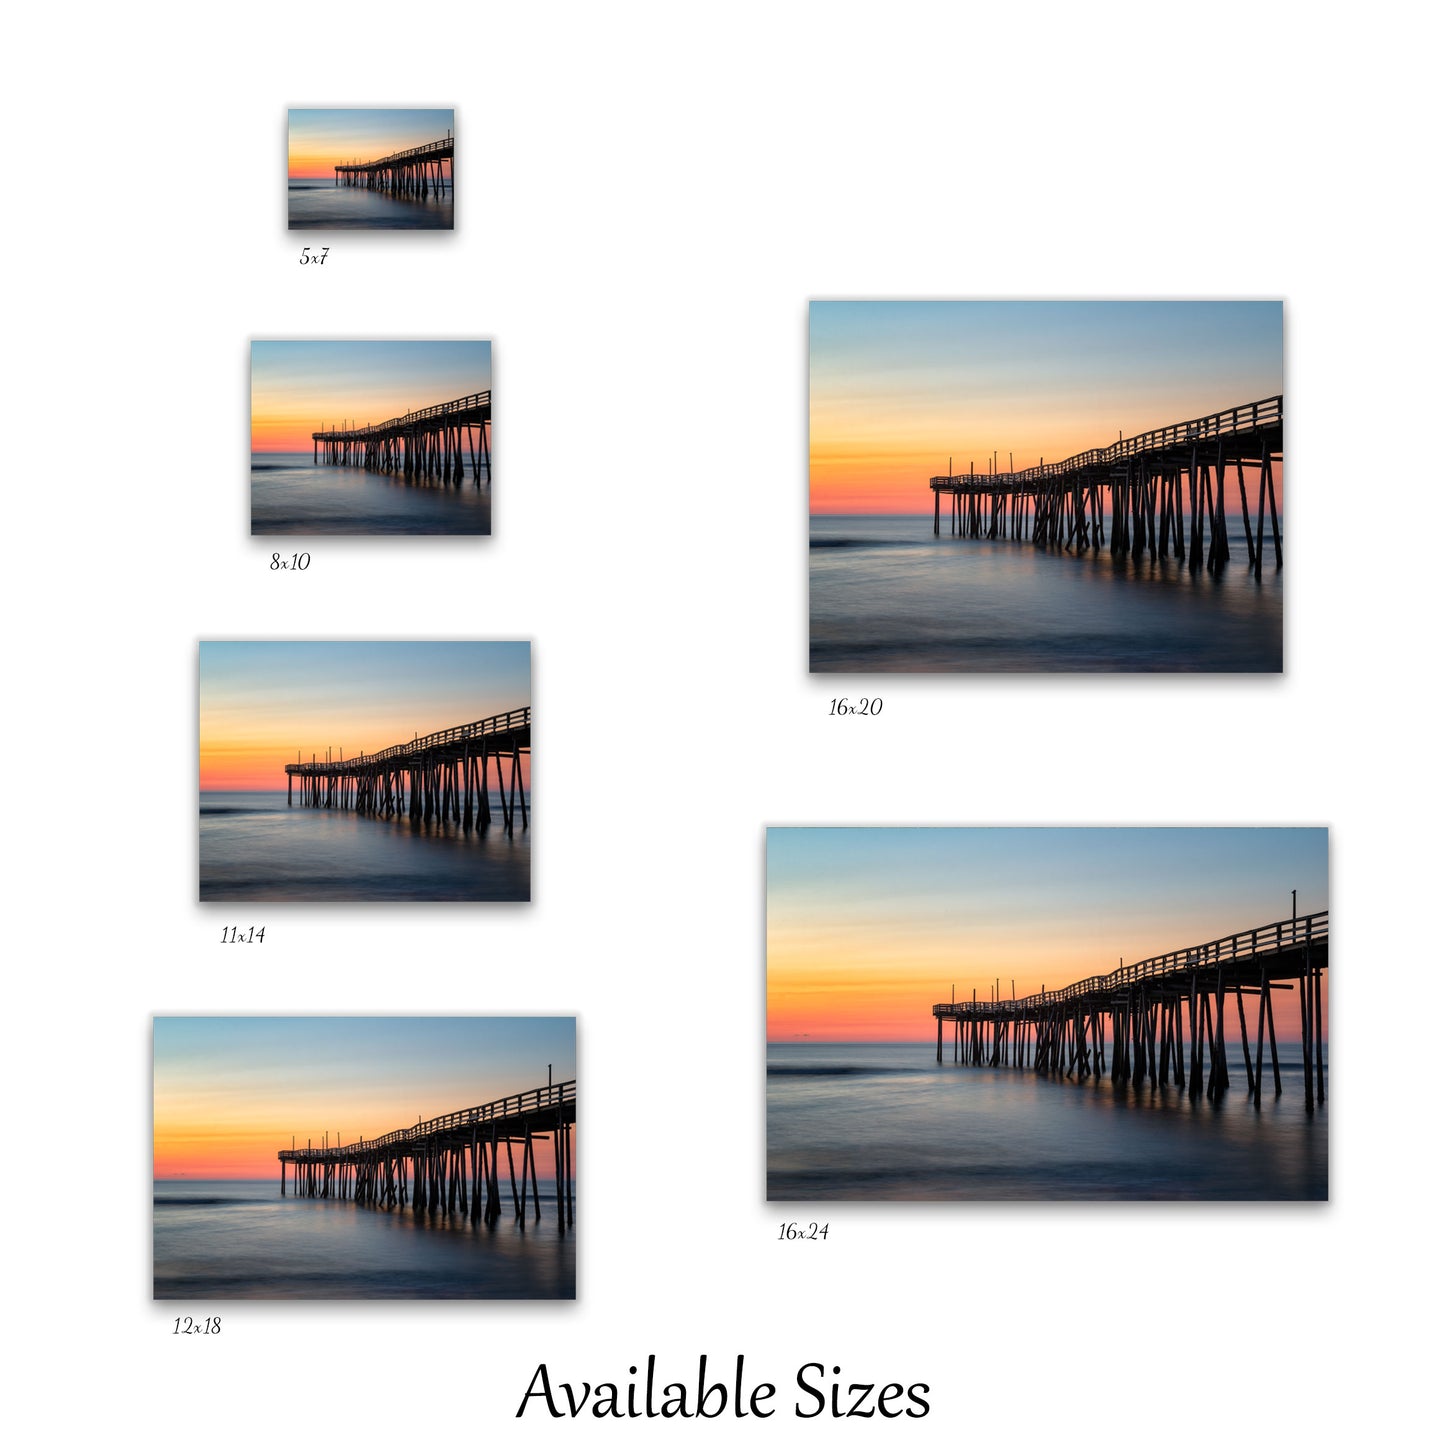 Visual representation of the Avon Pier wall art print sizes available: 5x7, 8x10, 11x14, 12x18, 16x20, and 16x24.